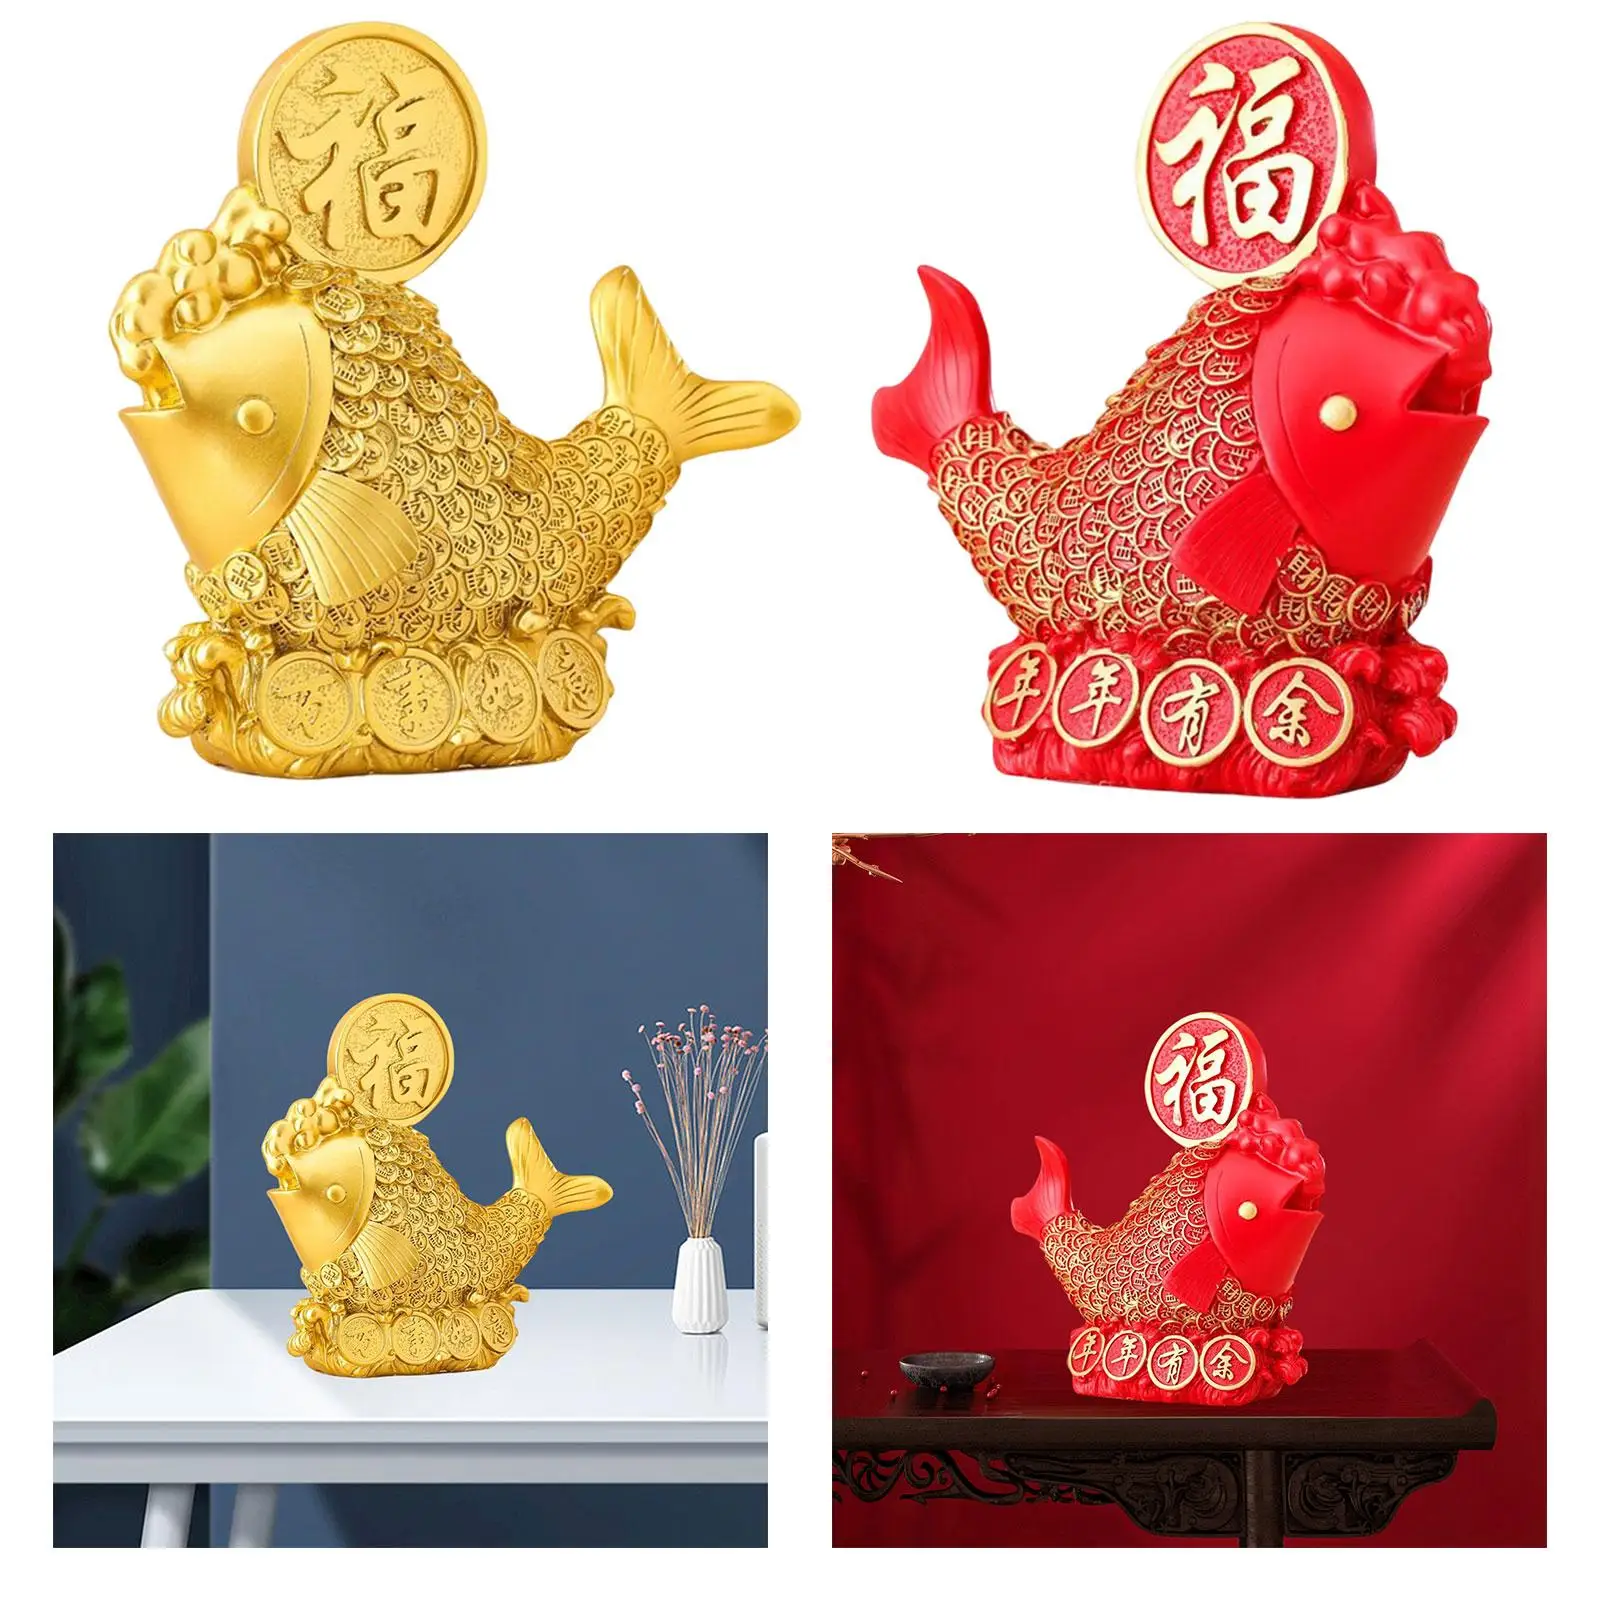 Resin Chinese Fish Statue Art Sculpture Collection Animals Fish Figurines Crafts for Shelf Desktop Bedroom Living Room Decor